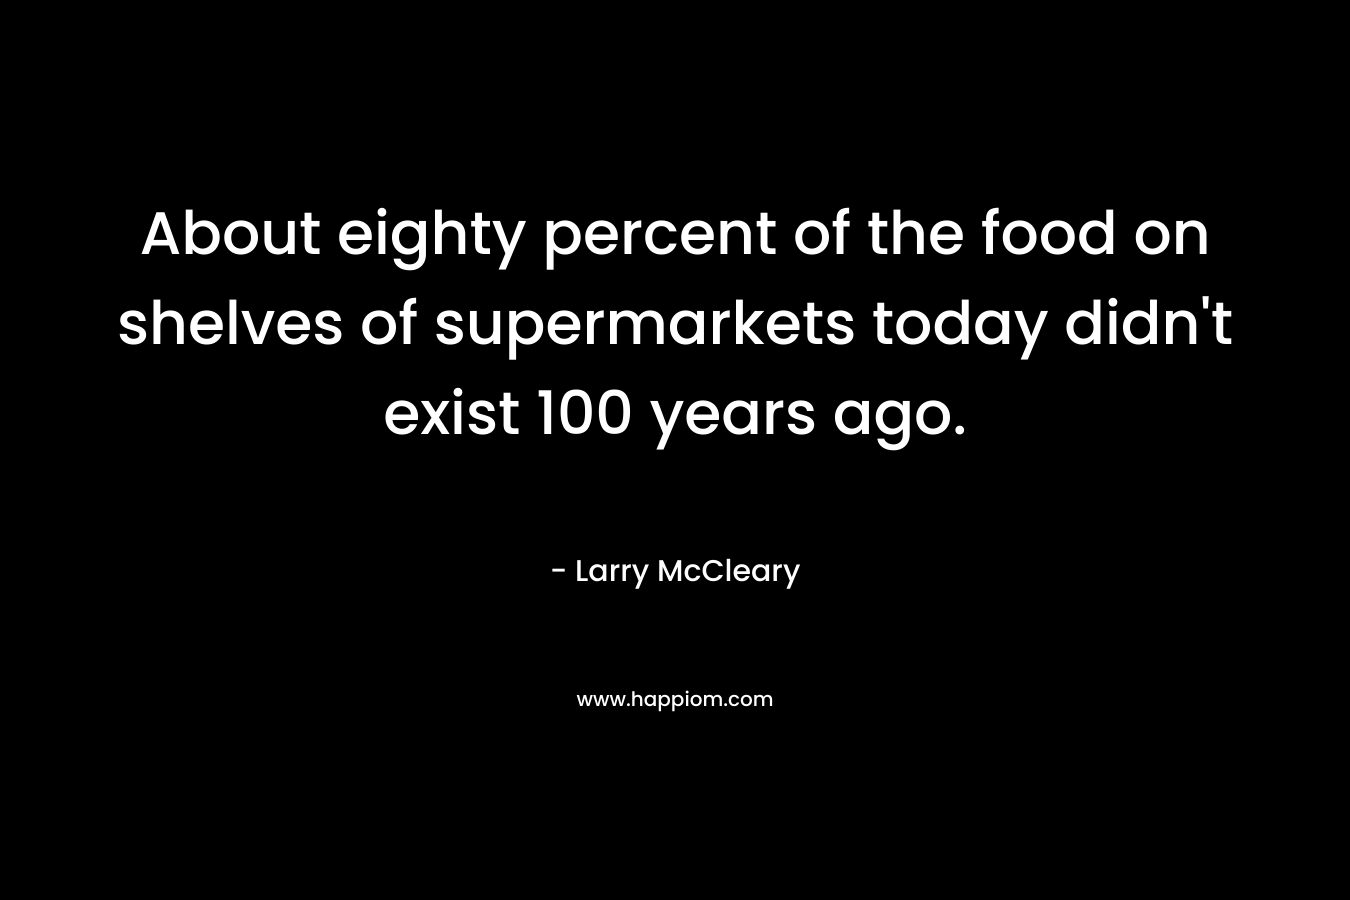 About eighty percent of the food on shelves of supermarkets today didn’t exist 100 years ago. – Larry McCleary